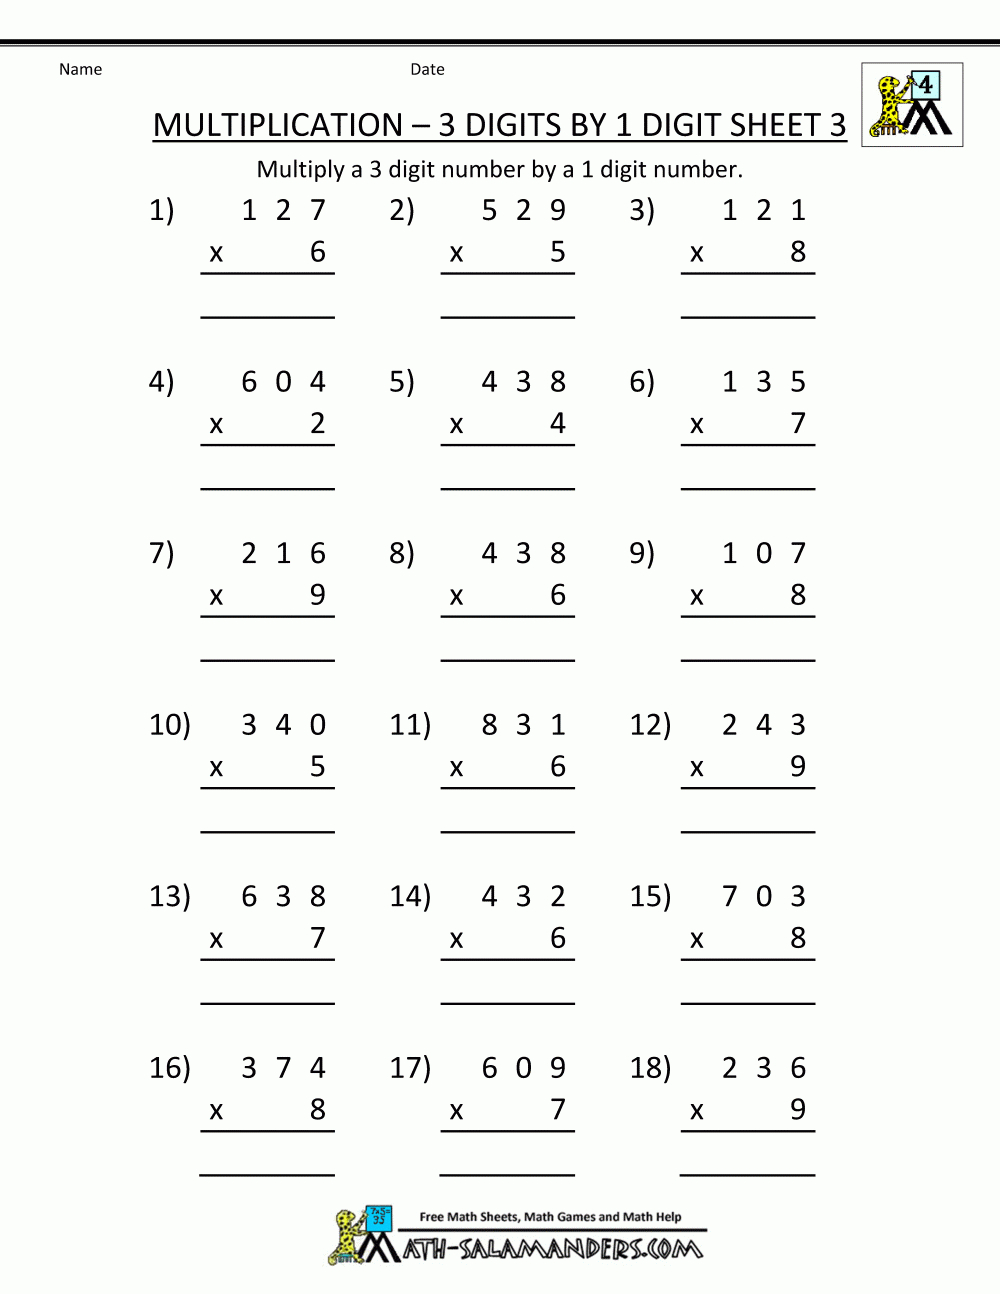 Free Math Sheets Multiplication 3 Digits1 Digit 3 | Math with regard to Free Printable Multiplication Problems